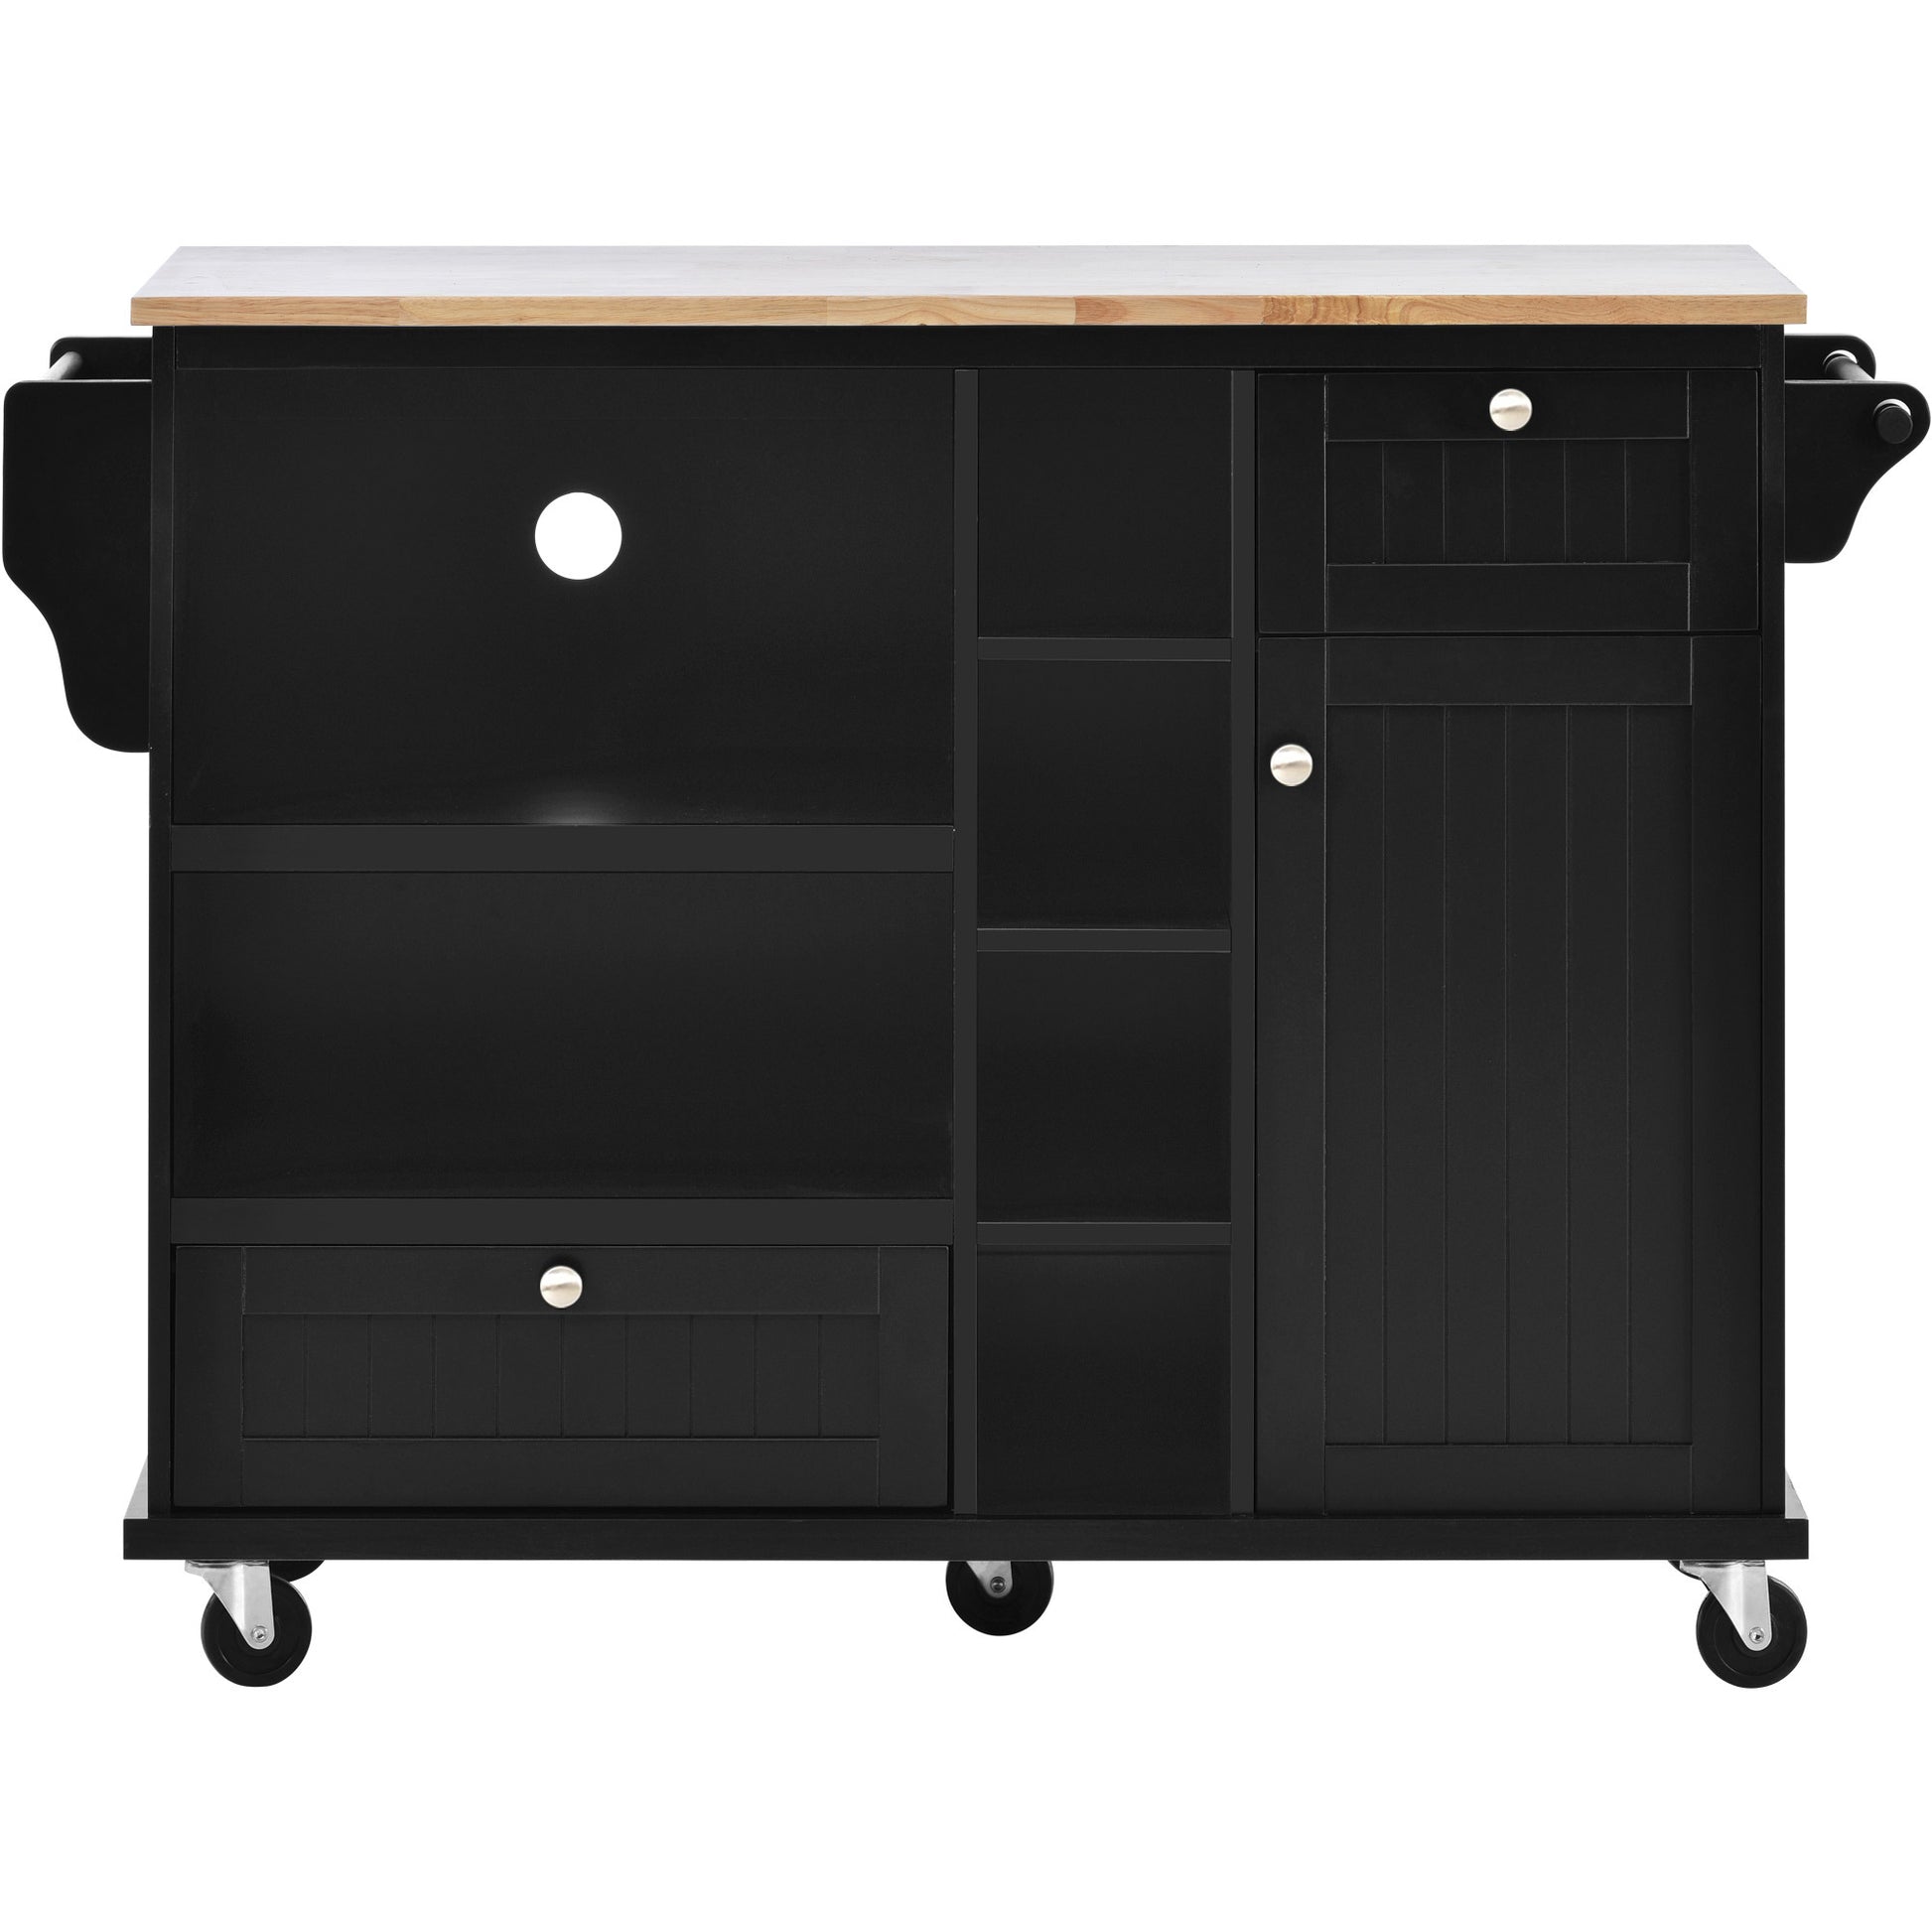 Kitchen Island Cart with Storage Cabinet and Two black-mdf